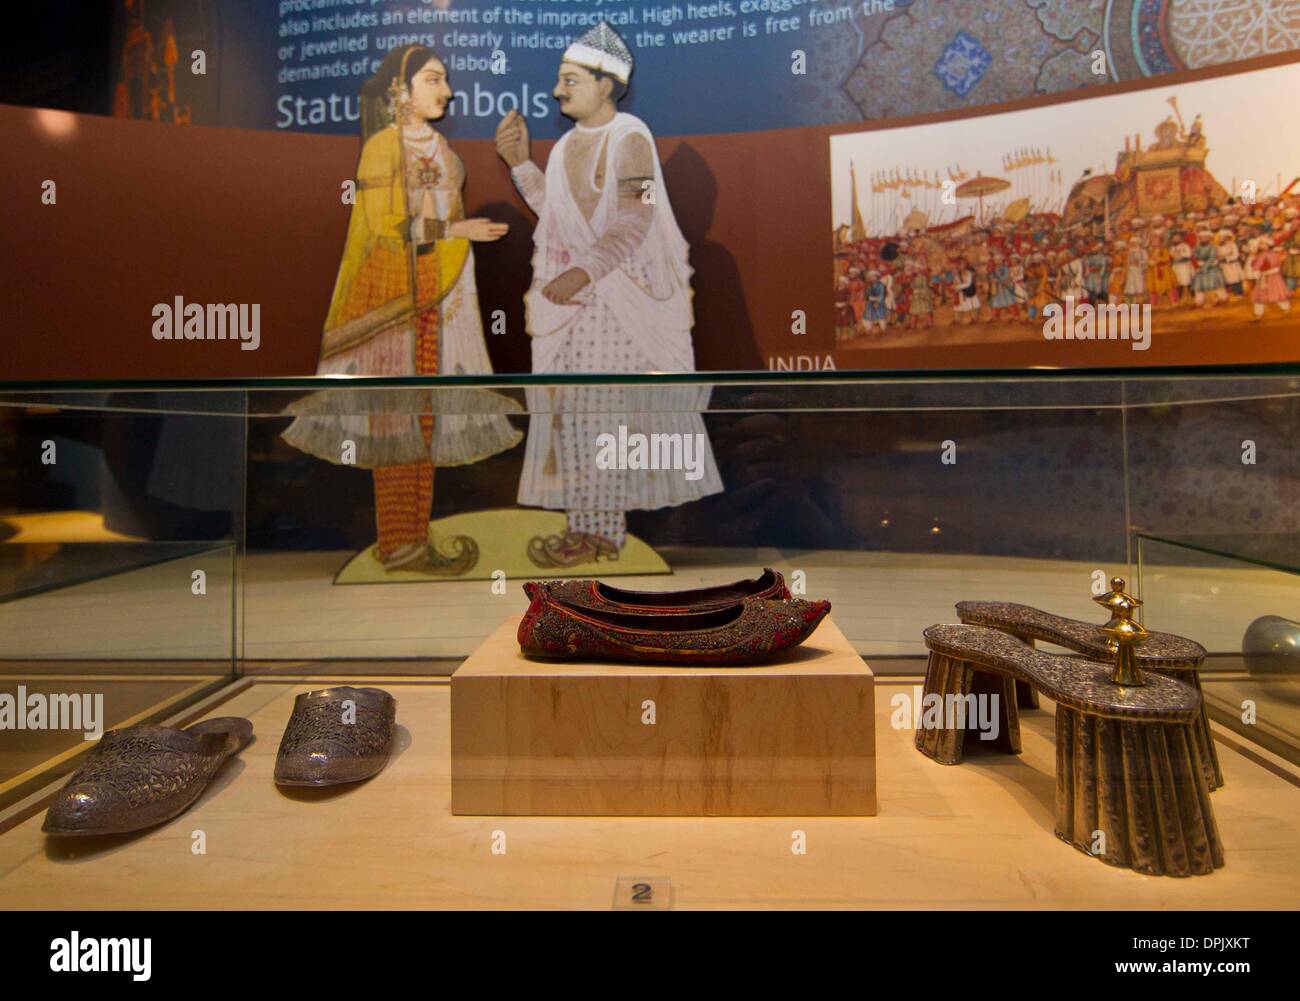 Toronto. 15th Jan, 2014. Photo taken on Jan. 14, 2014 shows Indian traditional shoes displayed at the Bata Shoe Museum in Toronto, Canada. As one of the largest shoe museums in the world, the Bata Shoe Museum collects more than 12,000 pairs of shoes. © Zou Zheng/Xinhua/Alamy Live News Stock Photo